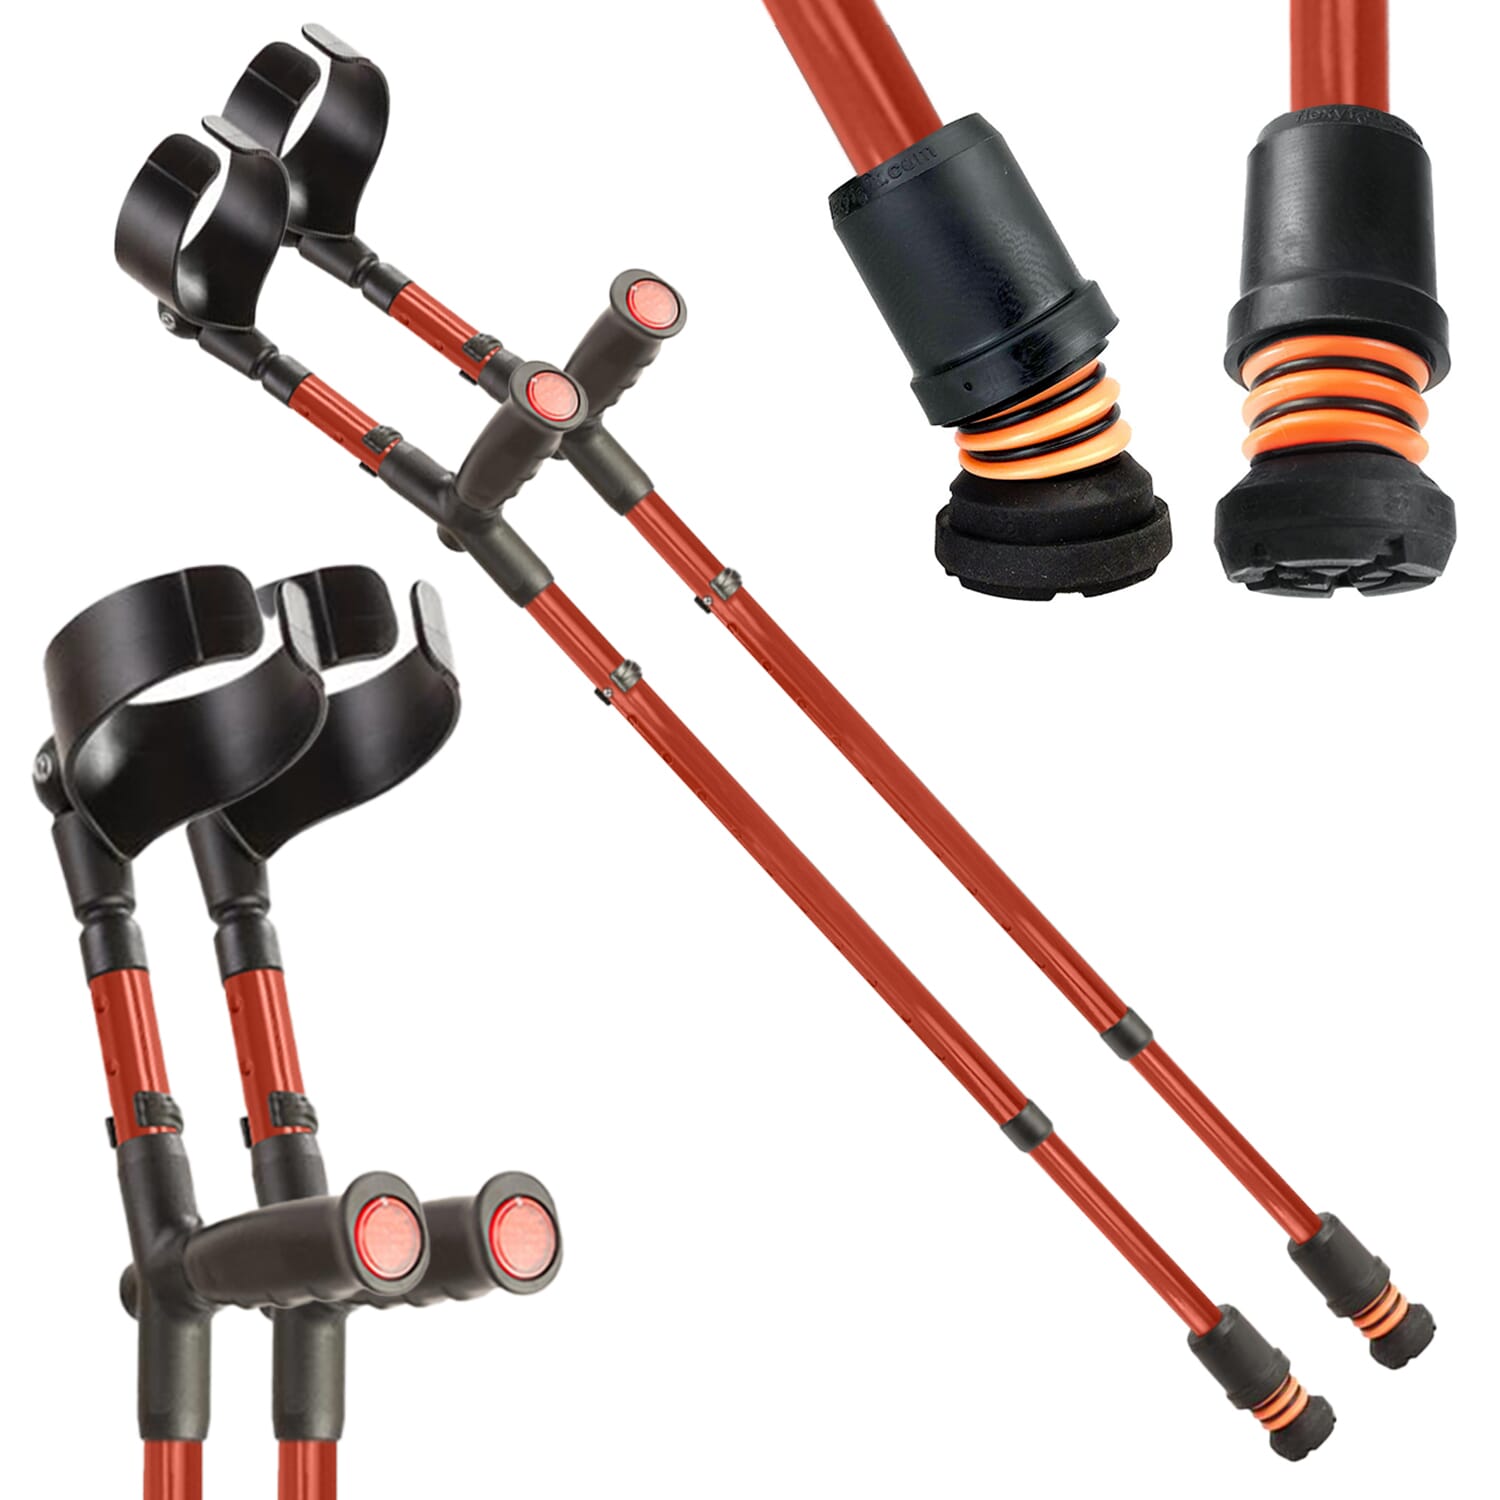 View Flexyfoot Soft Grip Double Adjustable Crutches Red Pair information